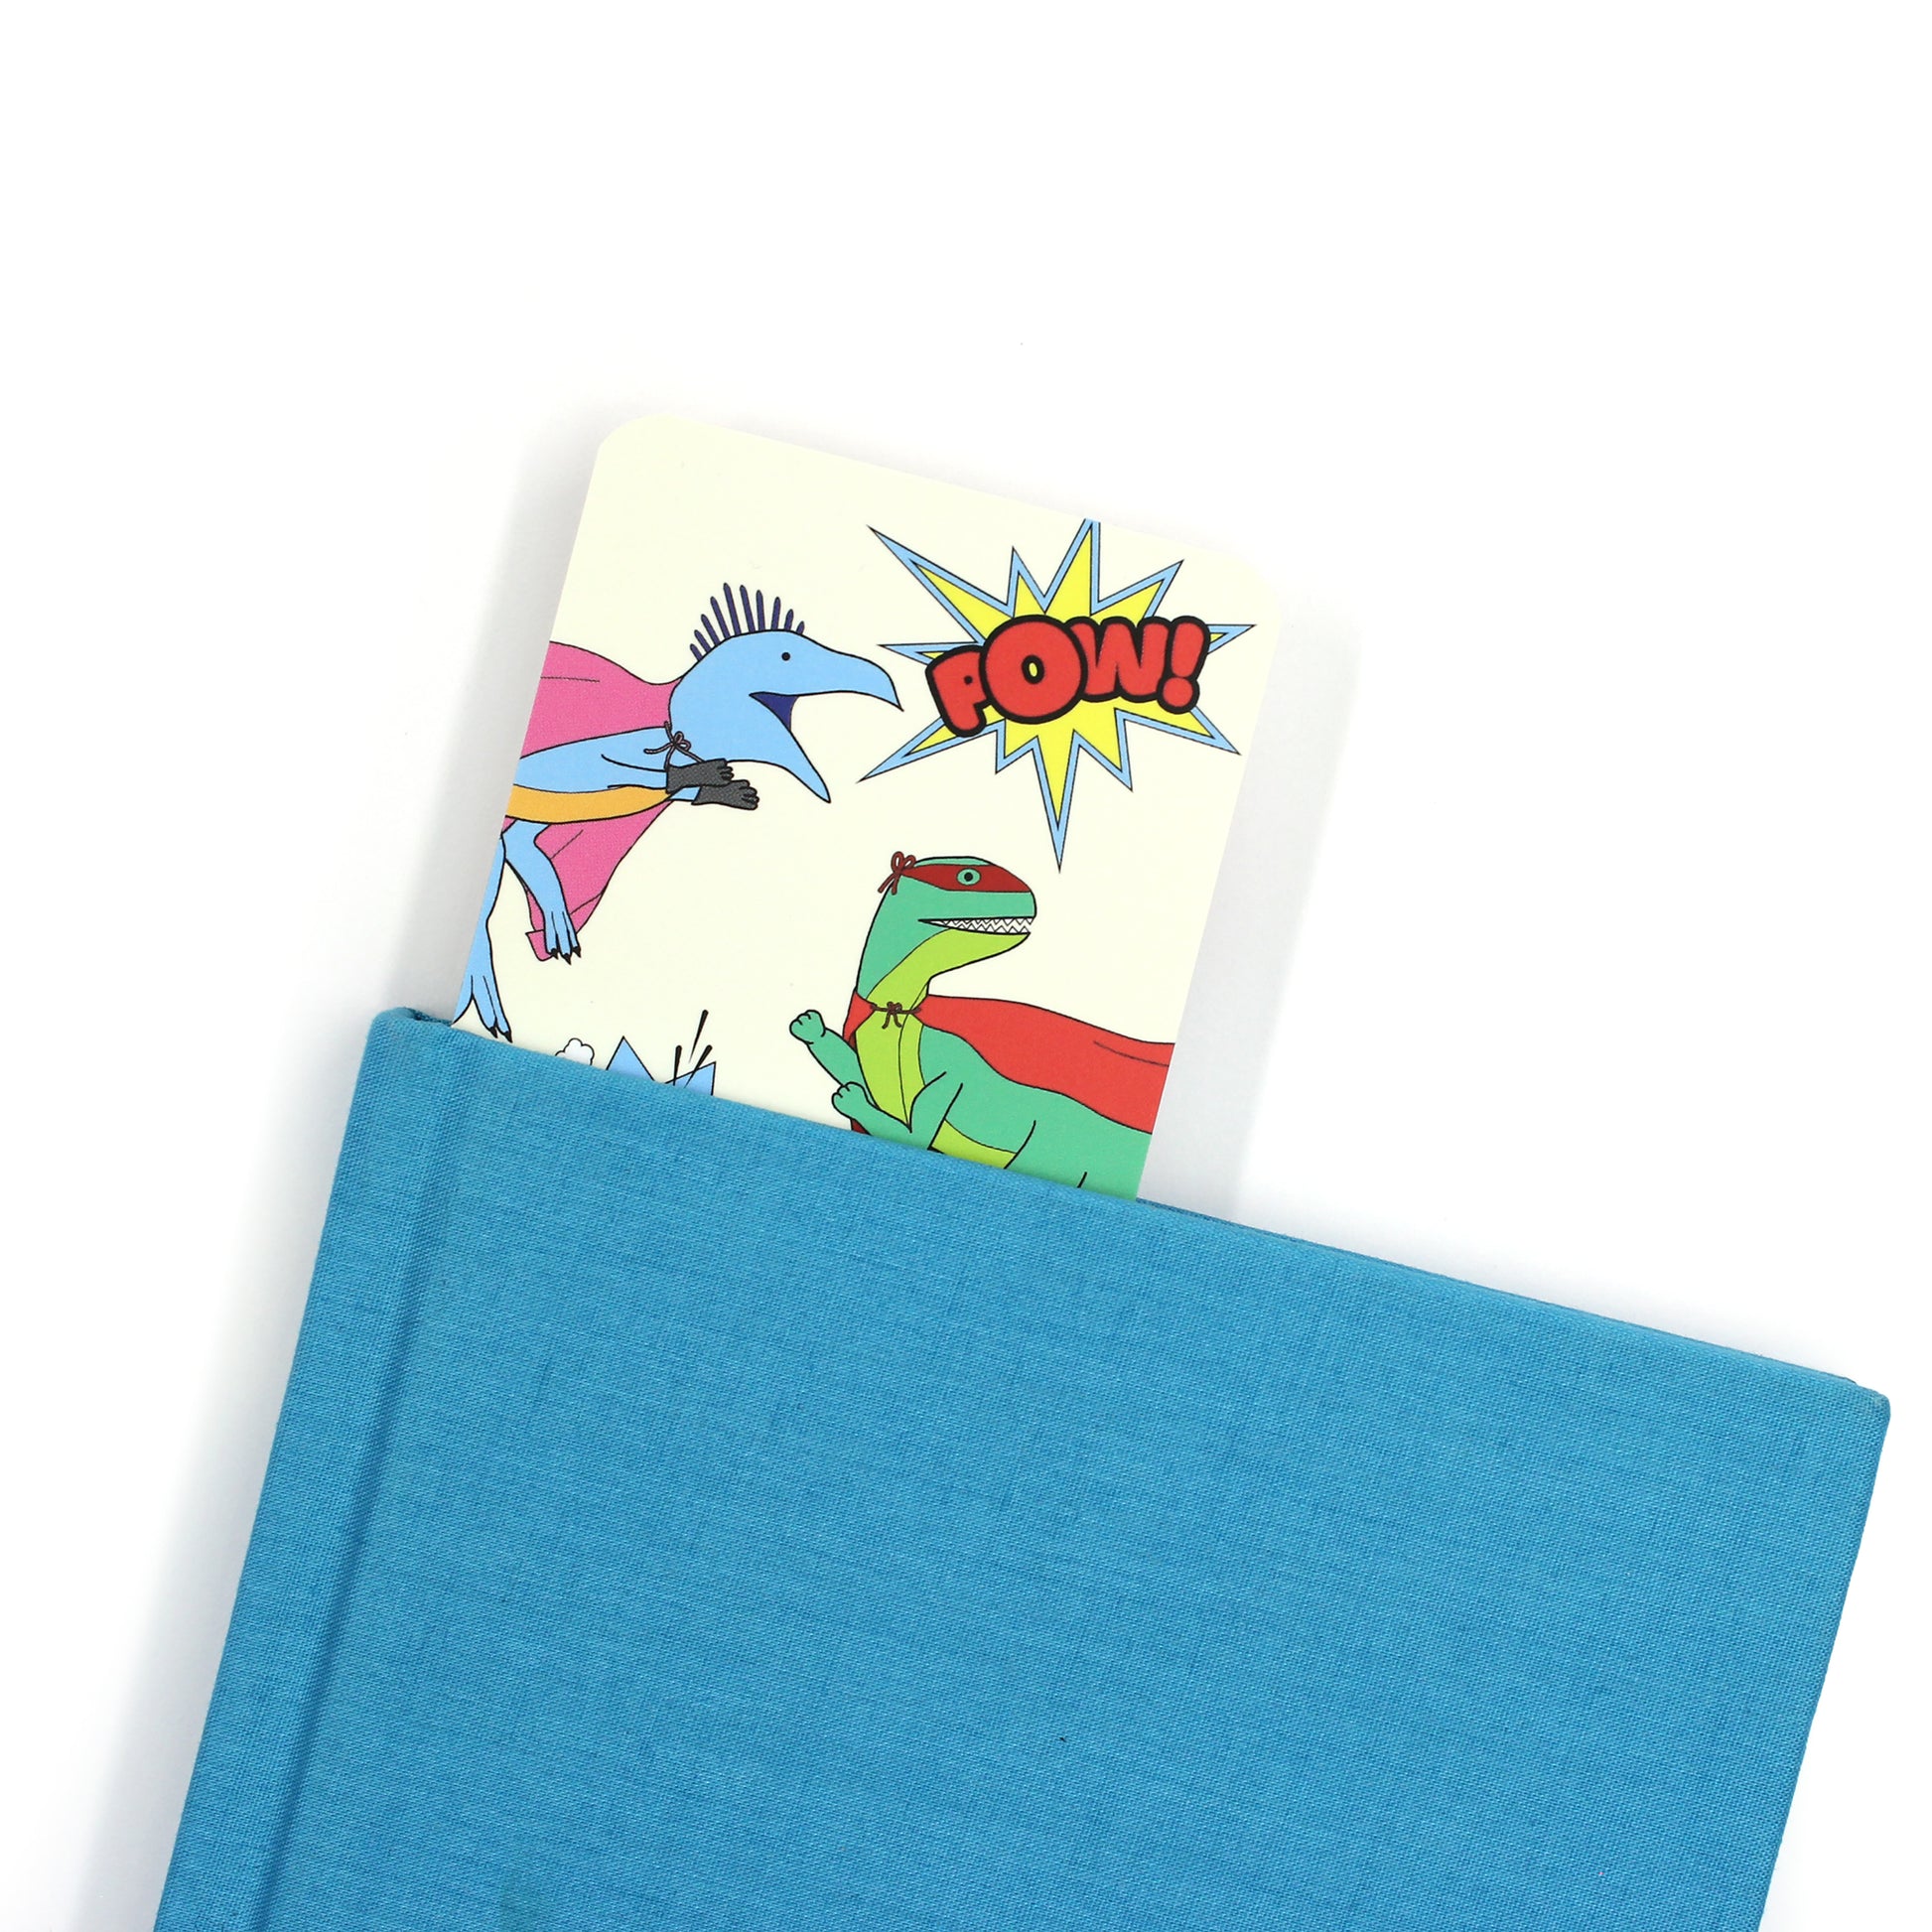 superhero dinosaur bookmark coming out of a blue book